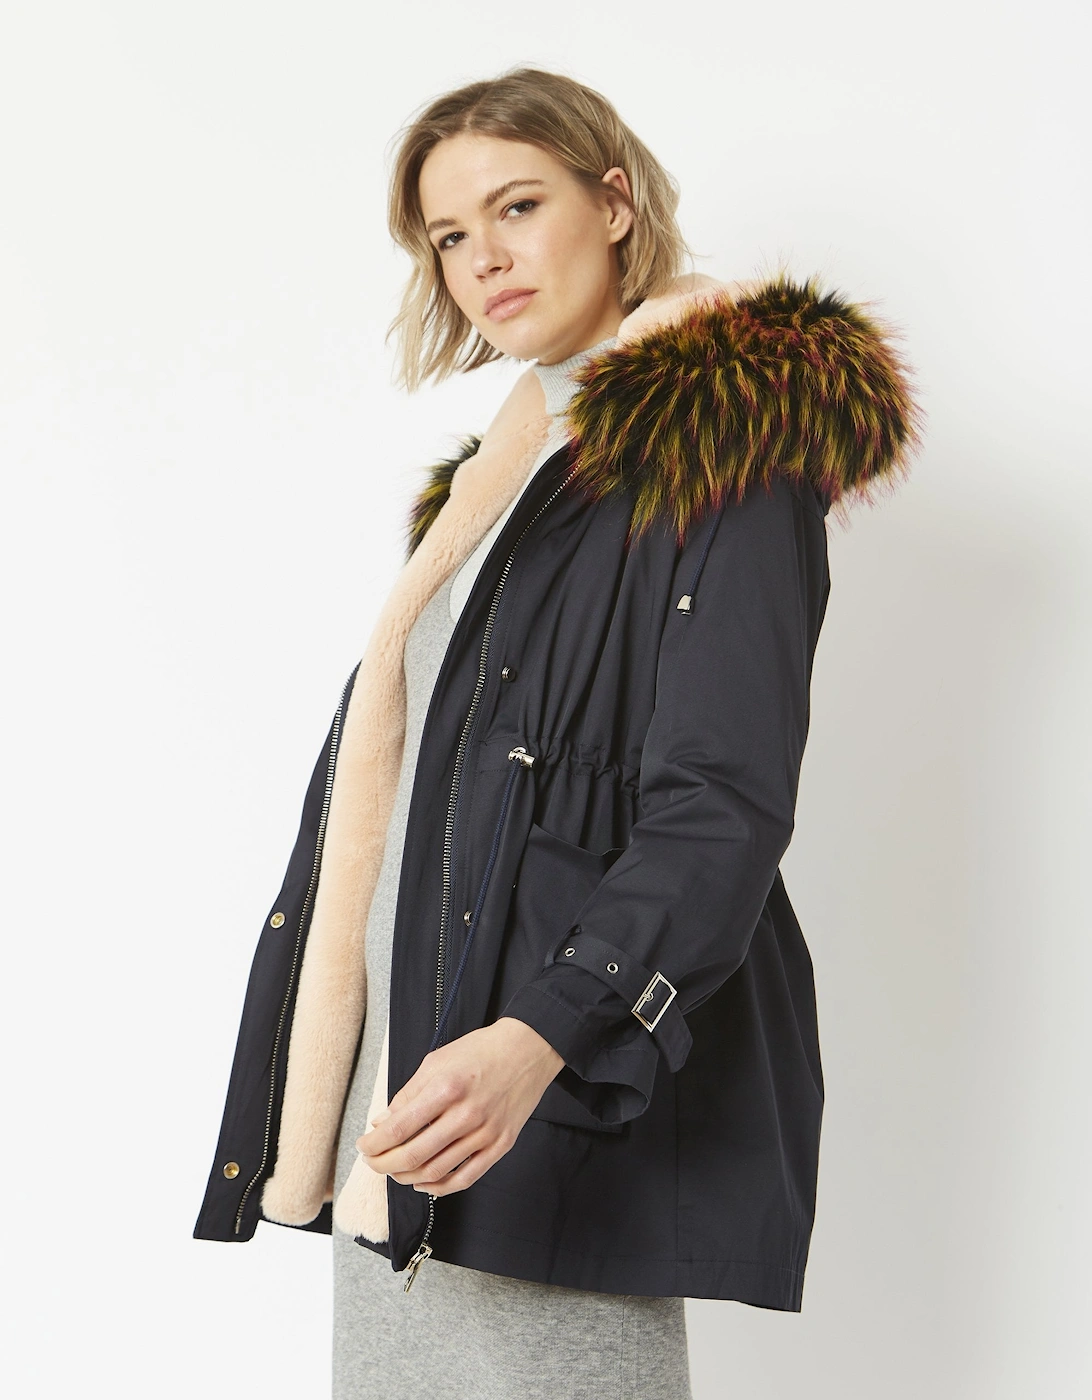 Three in One Parka Coat with Faux Fur Trim